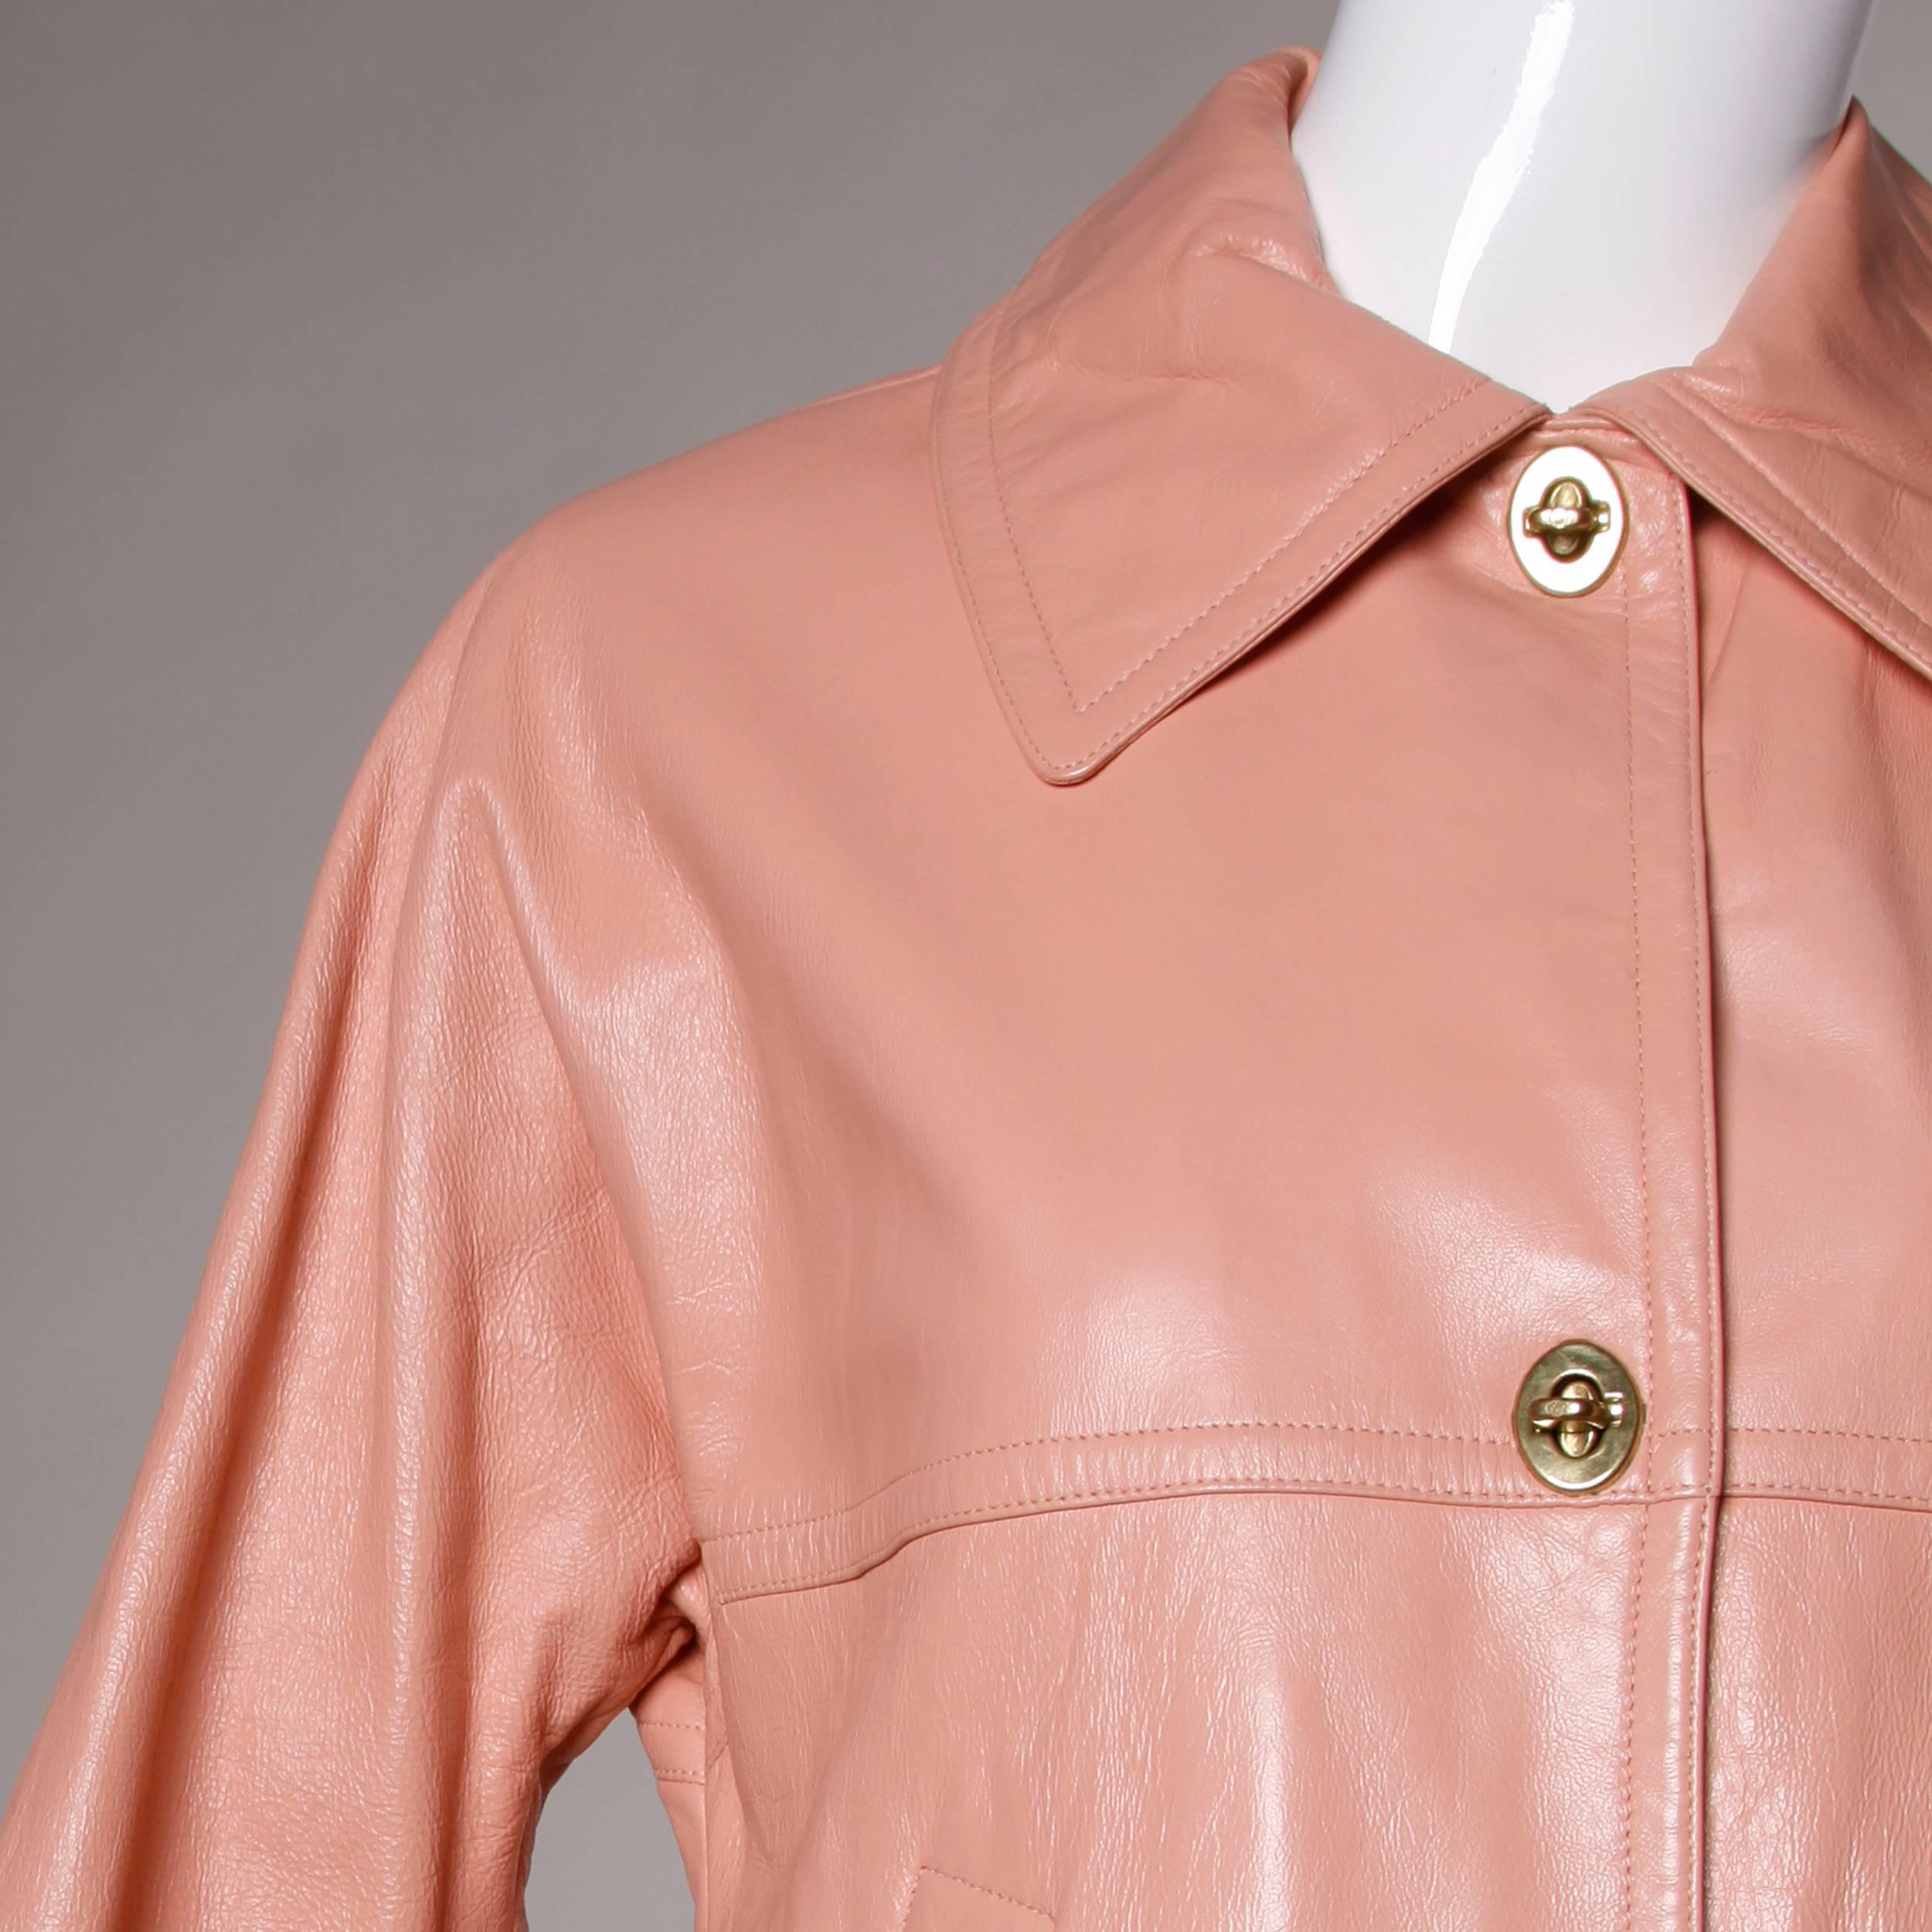 Rare and early 1960s Bonnie Cashin for Sils pink leather coat with iconic turn key closure.

Details:

Fully Lined
Side Pockets
Front Metal Turn Key Closure
Color: Pink
Fabric: Genuine Leather
Label: Sills A Bonnie Cashin Design/ Theodore's